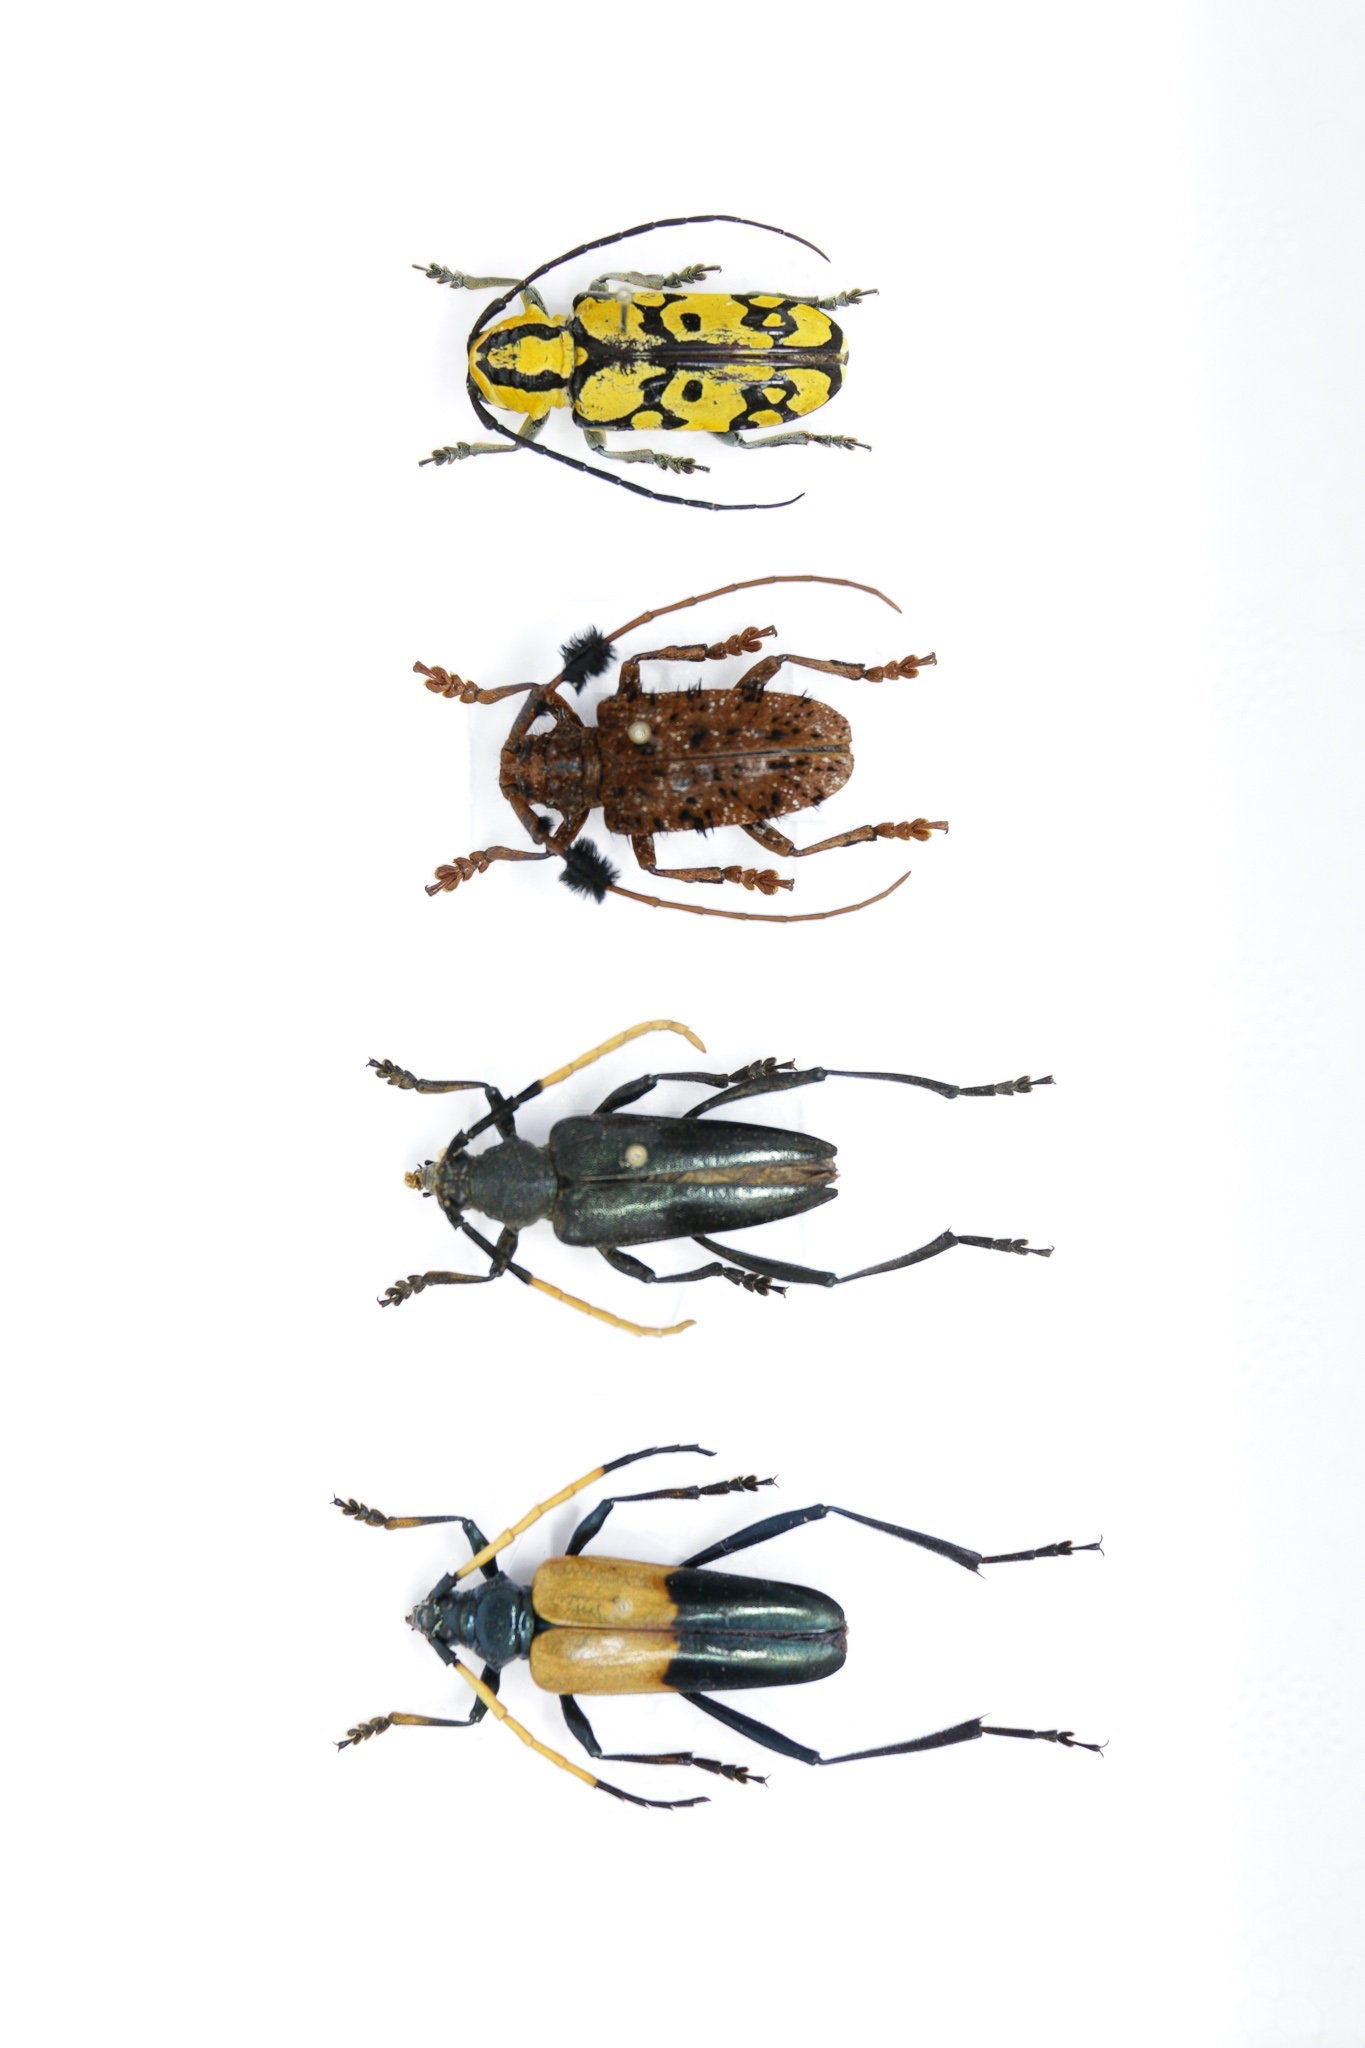 Longhorn Beetle Collection (Coleoptera) Inc. Scientific Collection Data, A1 Quality, Entomology, Real Insect Specimens #20